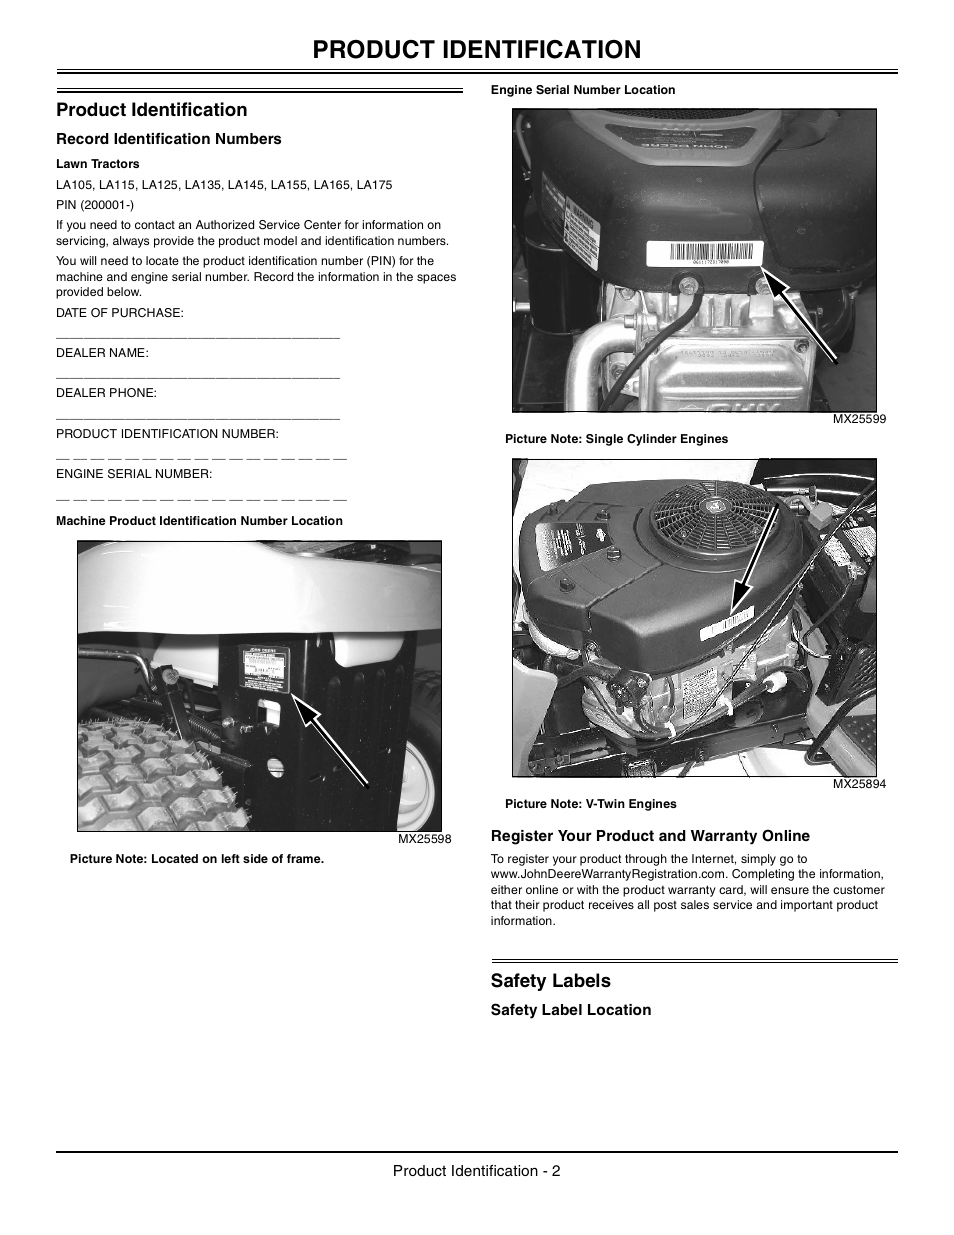 Product identification, Record identification numbers, Lawn tractors | Machine product identification number location, Engine serial number location, Register your product and warranty online, Safety labels, Safety label location | John Deere la105 User Manual | Page 3 / 52